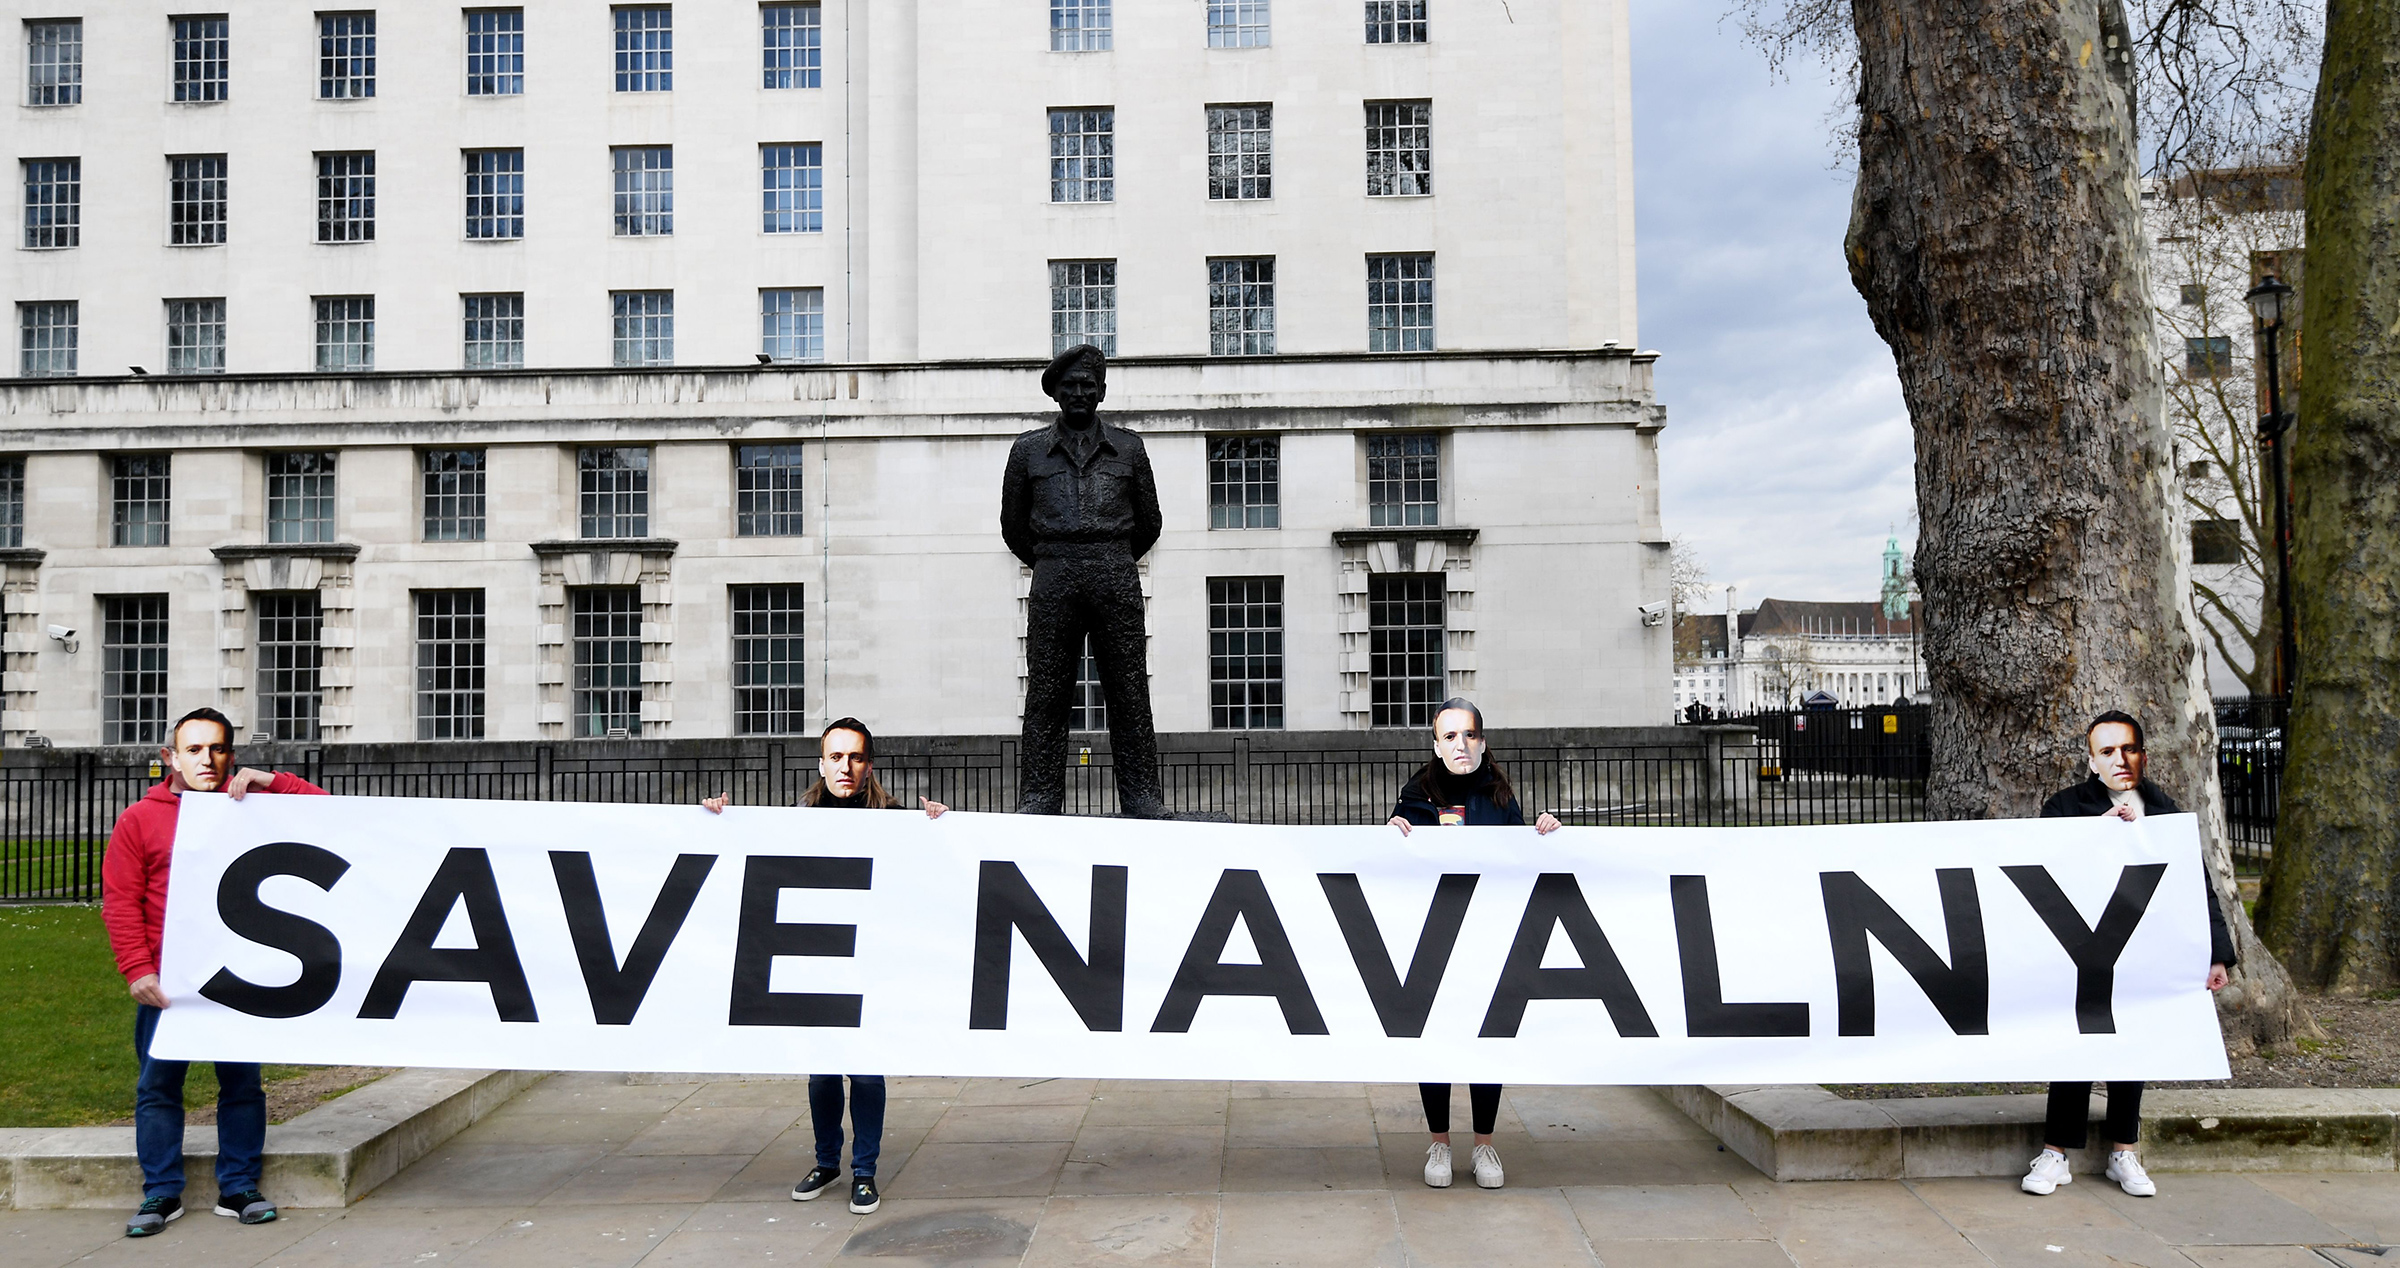 Supporters of Navalny stage a demonstration organized by the group "Art of Rebel" outside Downing Street in London on April 13, 2021. (Facundo Arrizabalaga—EPA-EFE/Shutterstock)